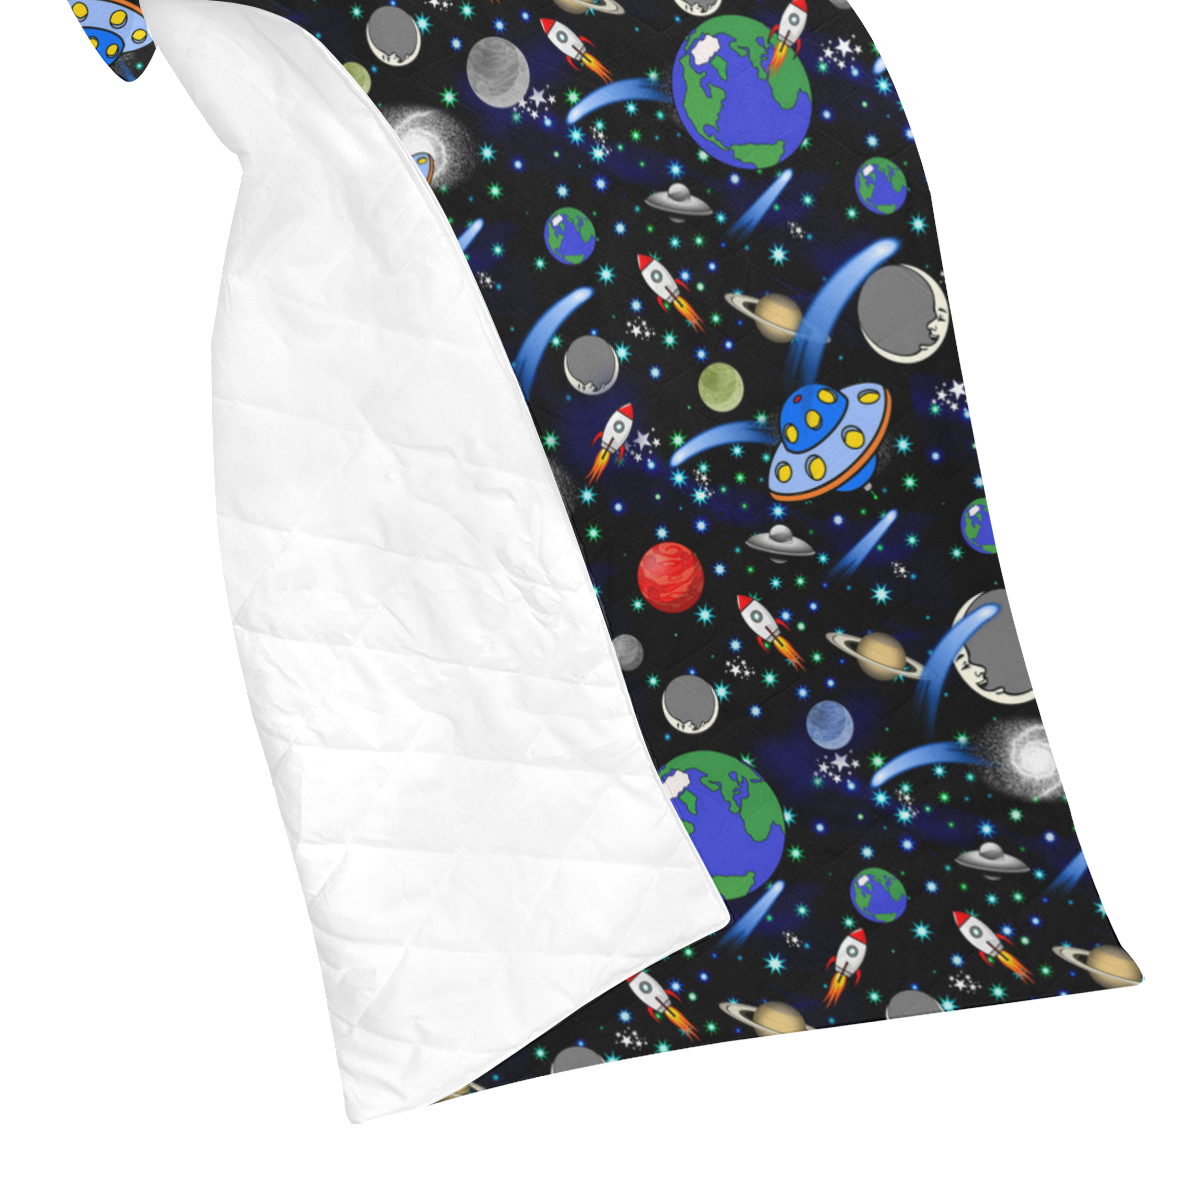 Galaxy Universe - Planets, Stars, Comets, Rockets Quilt 60"x70"